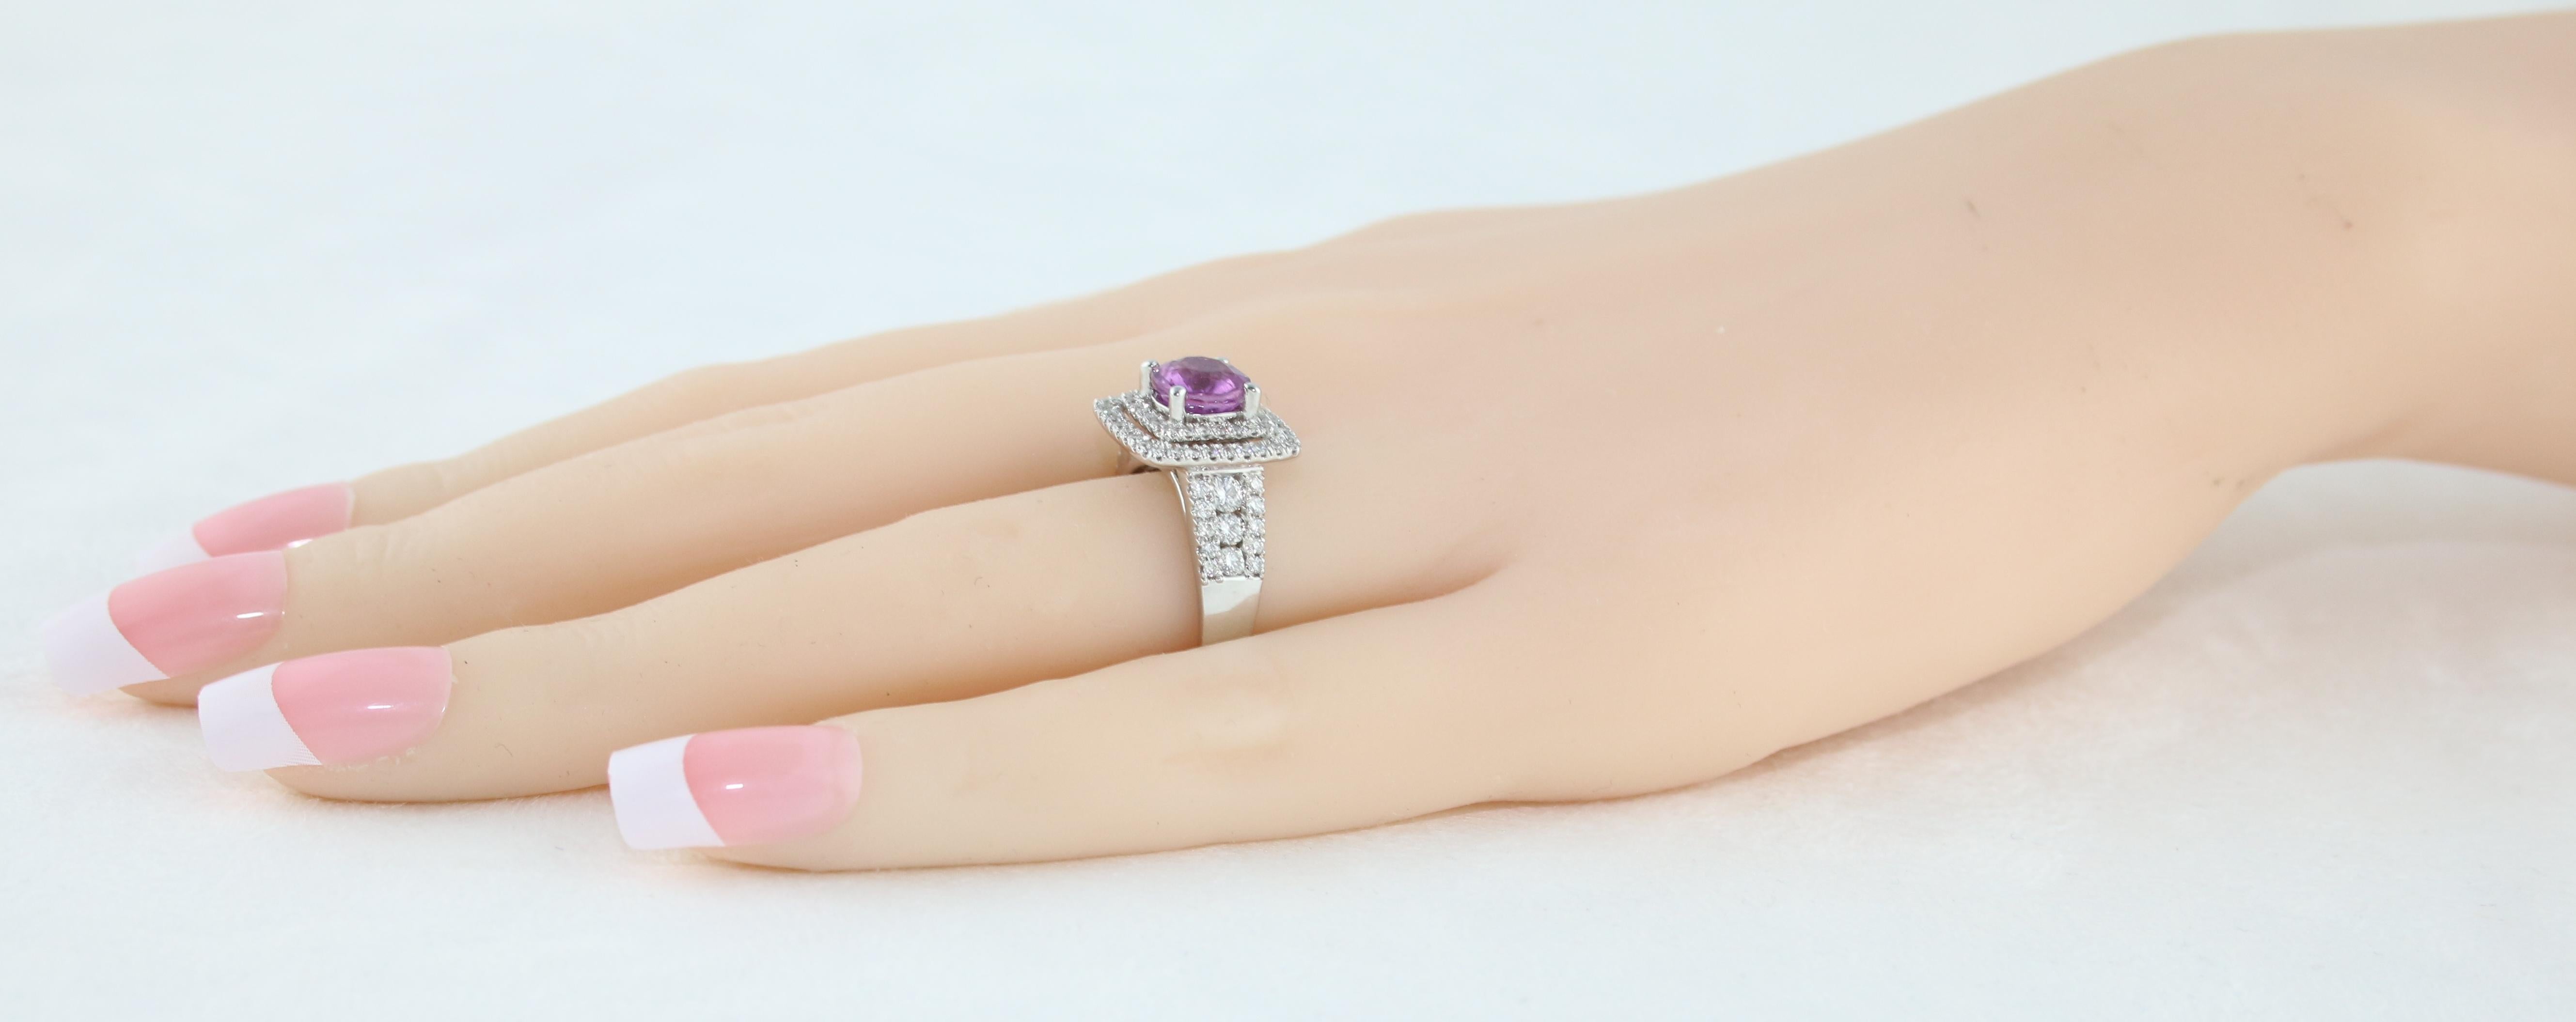 Women's Certified No Heat 1.97 Carat Pinkish Violet Sapphire Diamond Gold Ring For Sale